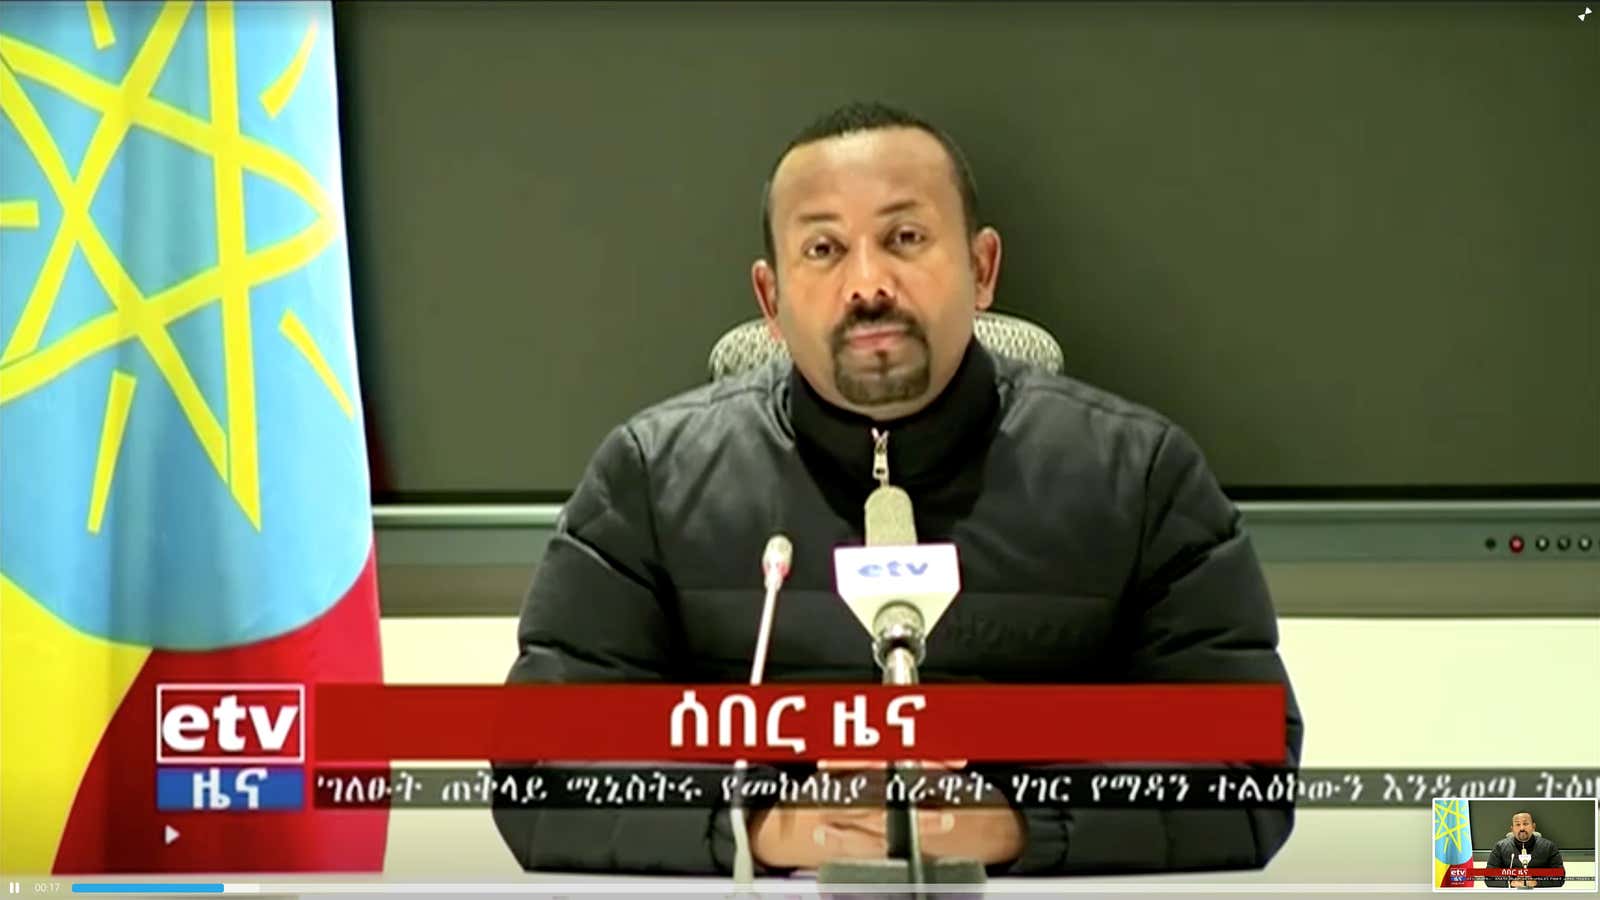 A still image taken from a video shows Ethiopian prime minister Abiy Ahmed addressing the nation in Addis Ababa, Ethiopia Nov. 4, 2020.